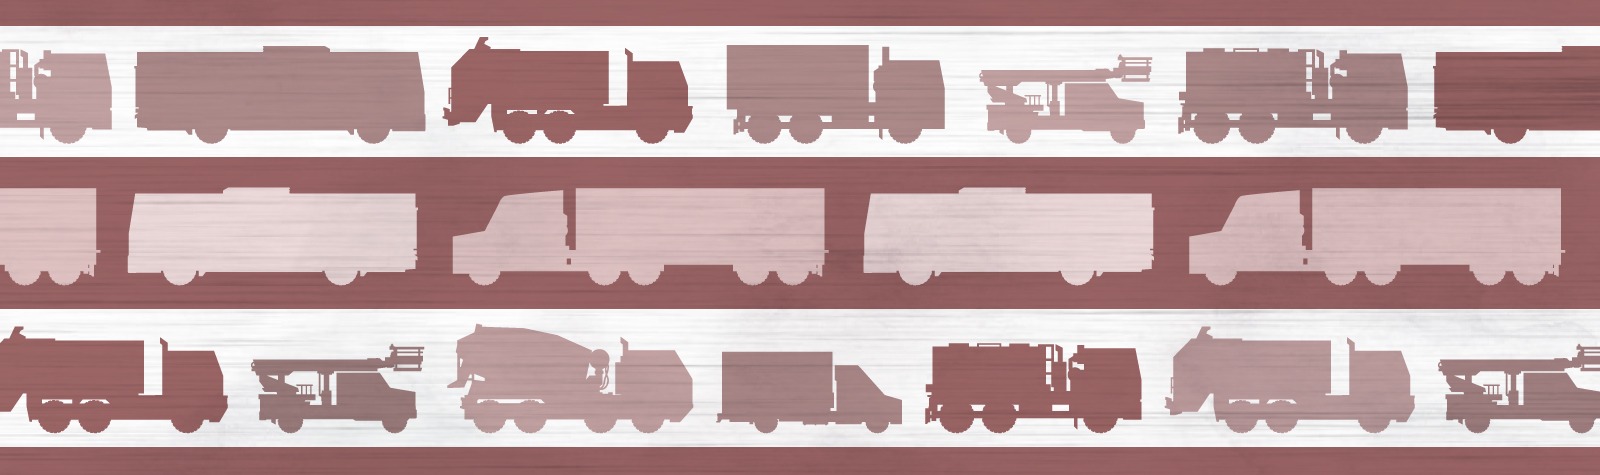 essential-guide-to-truck-classification-classes-1-through-9